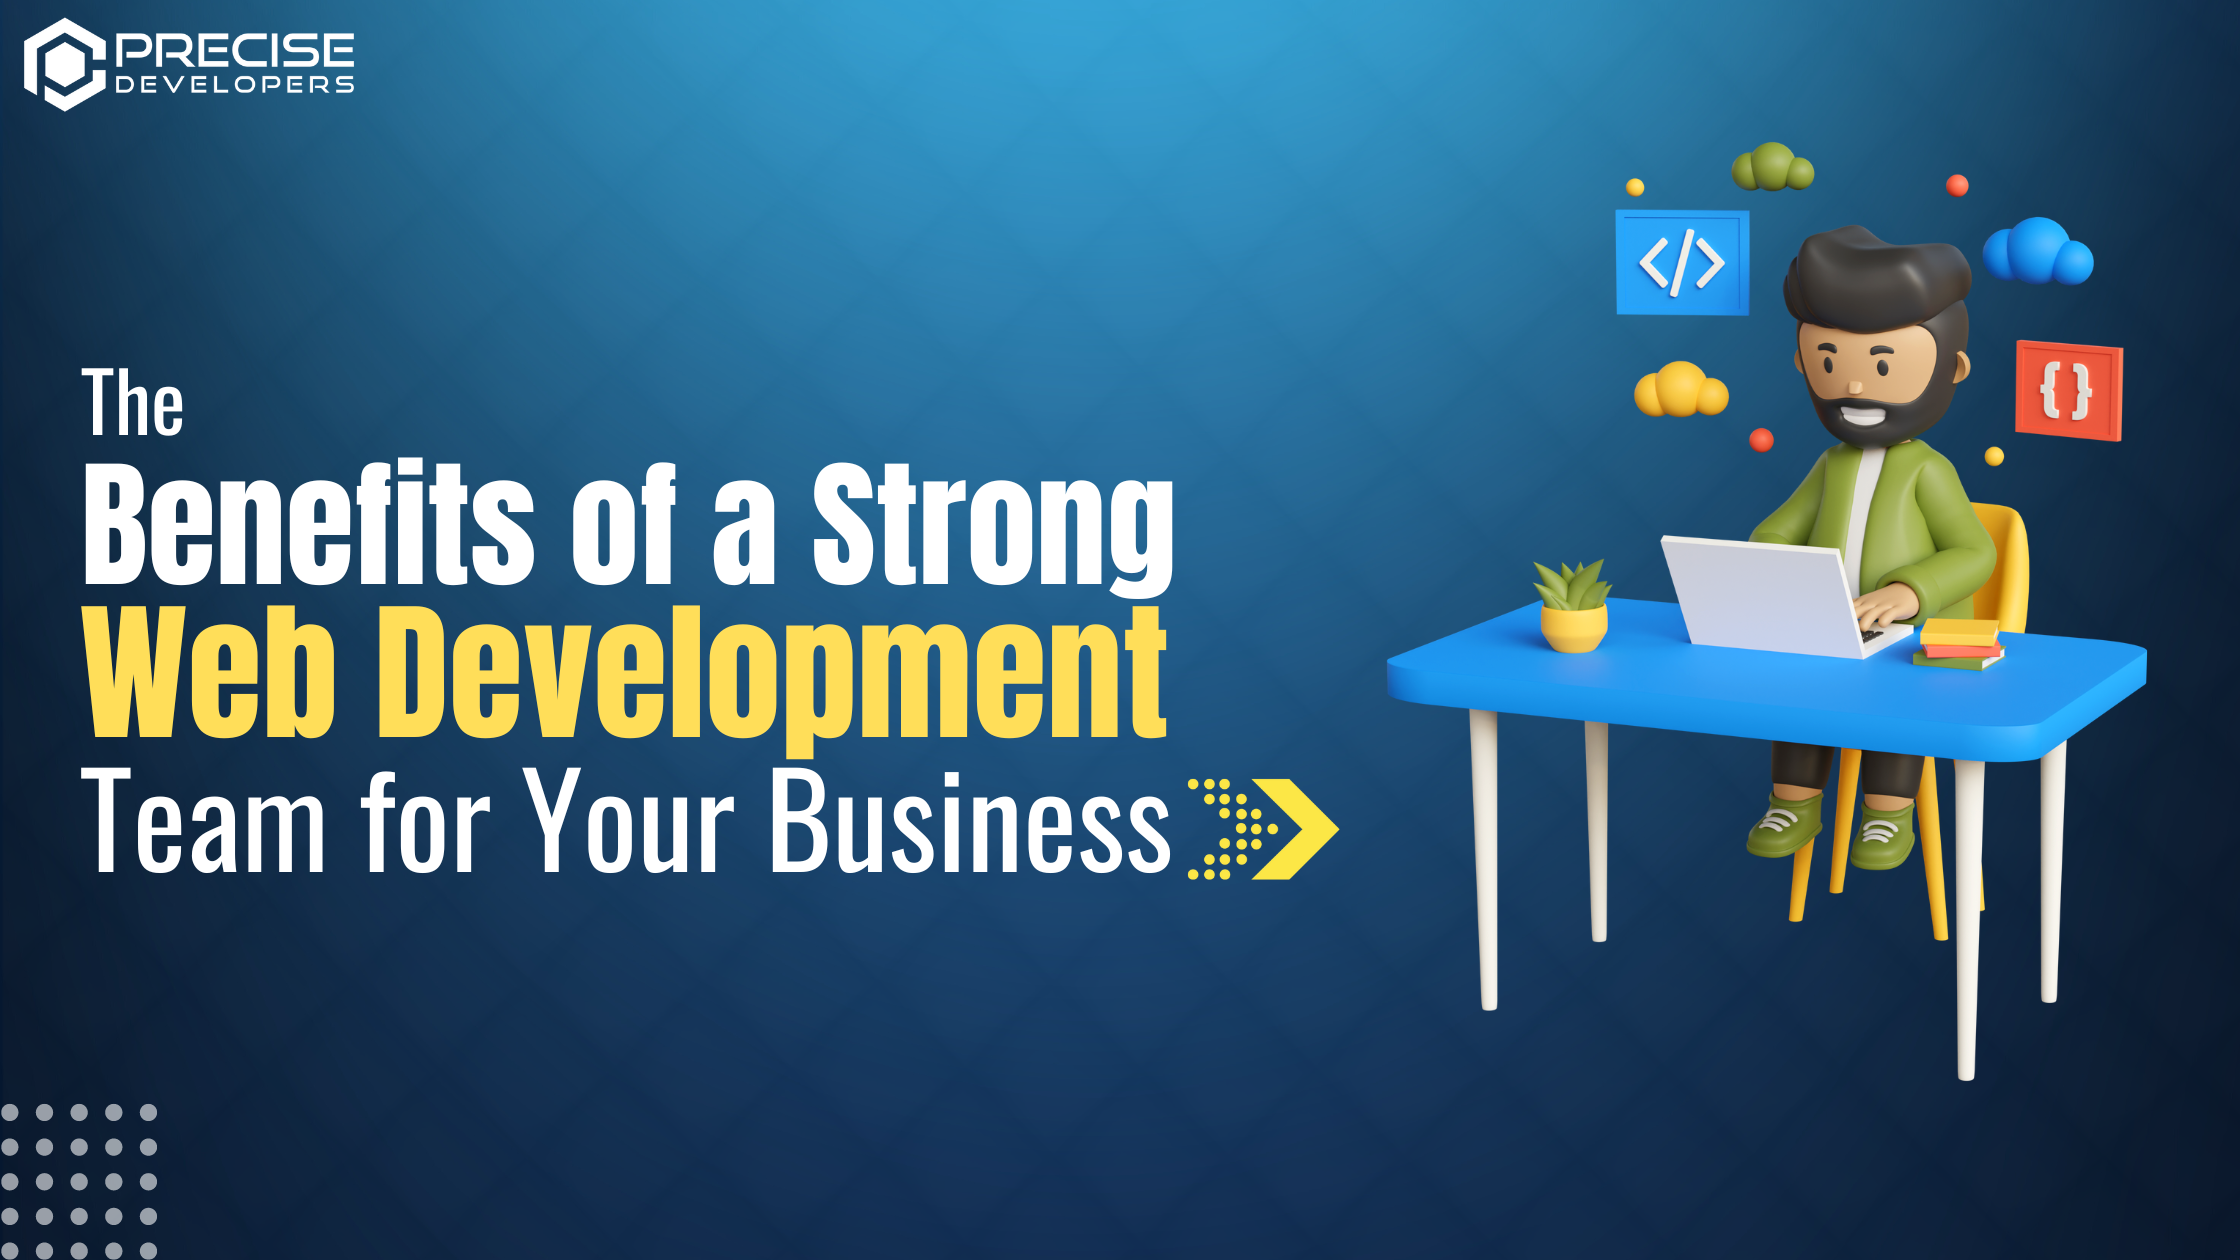 The Benefits of a Strong Web Development Team for Your Business